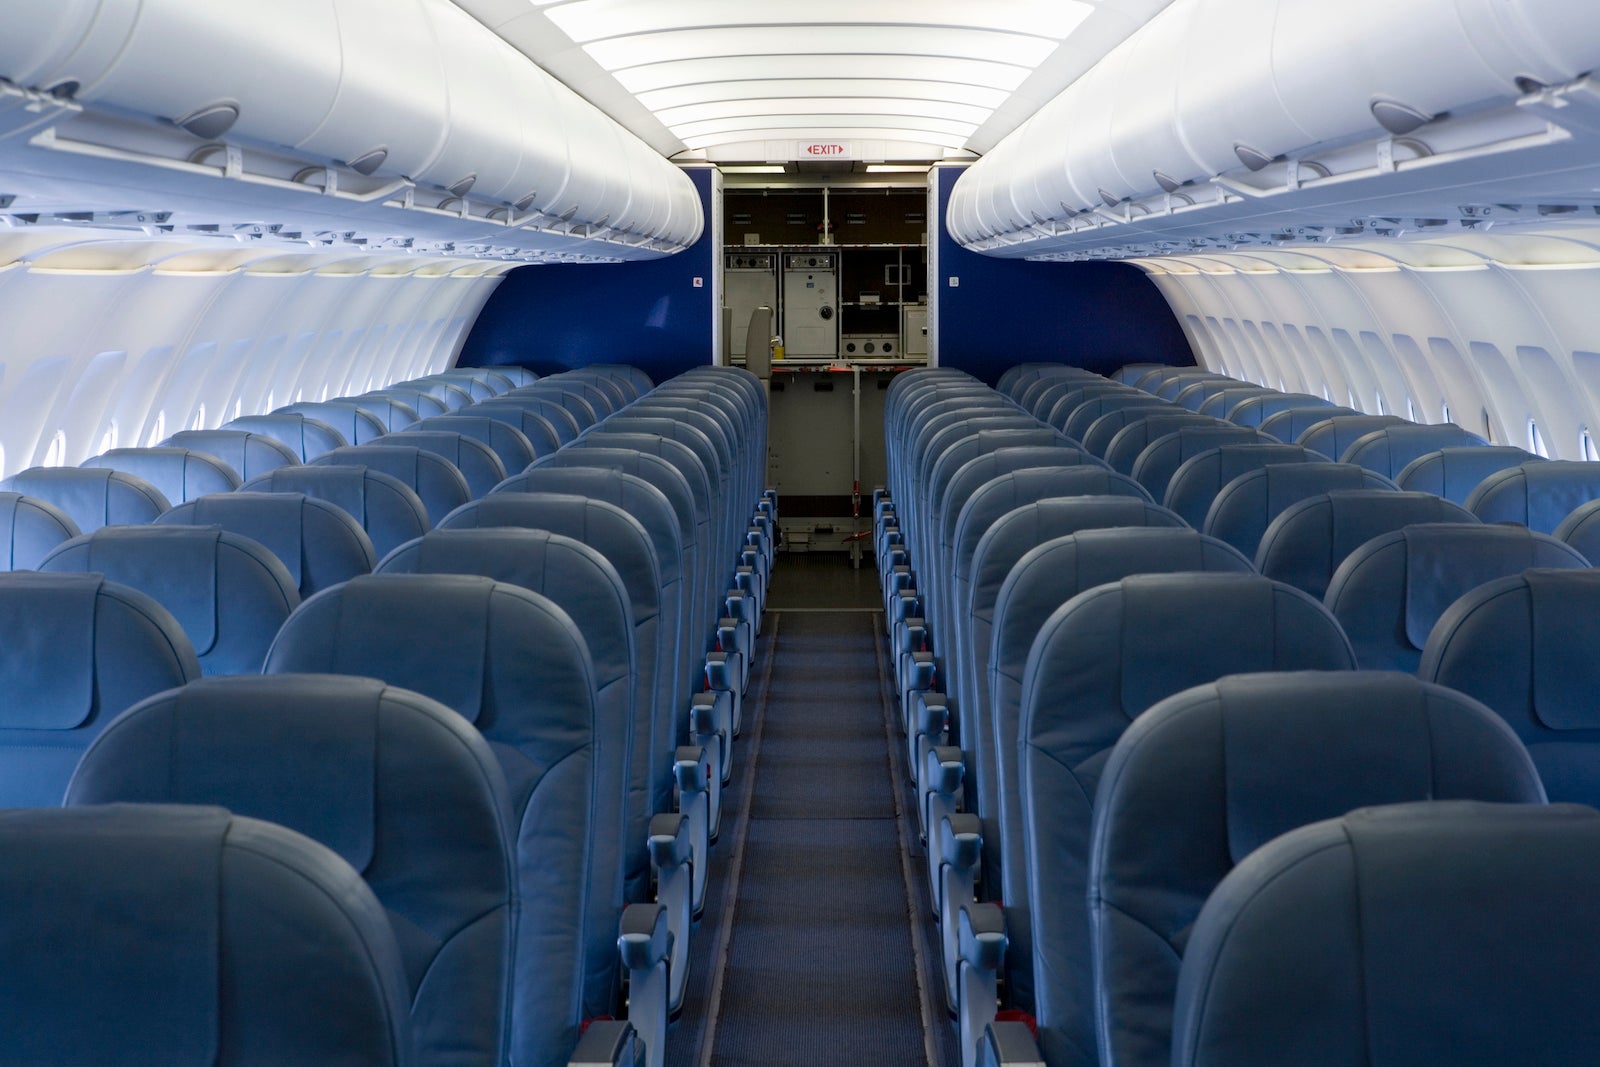 The empty cabin of an airplane